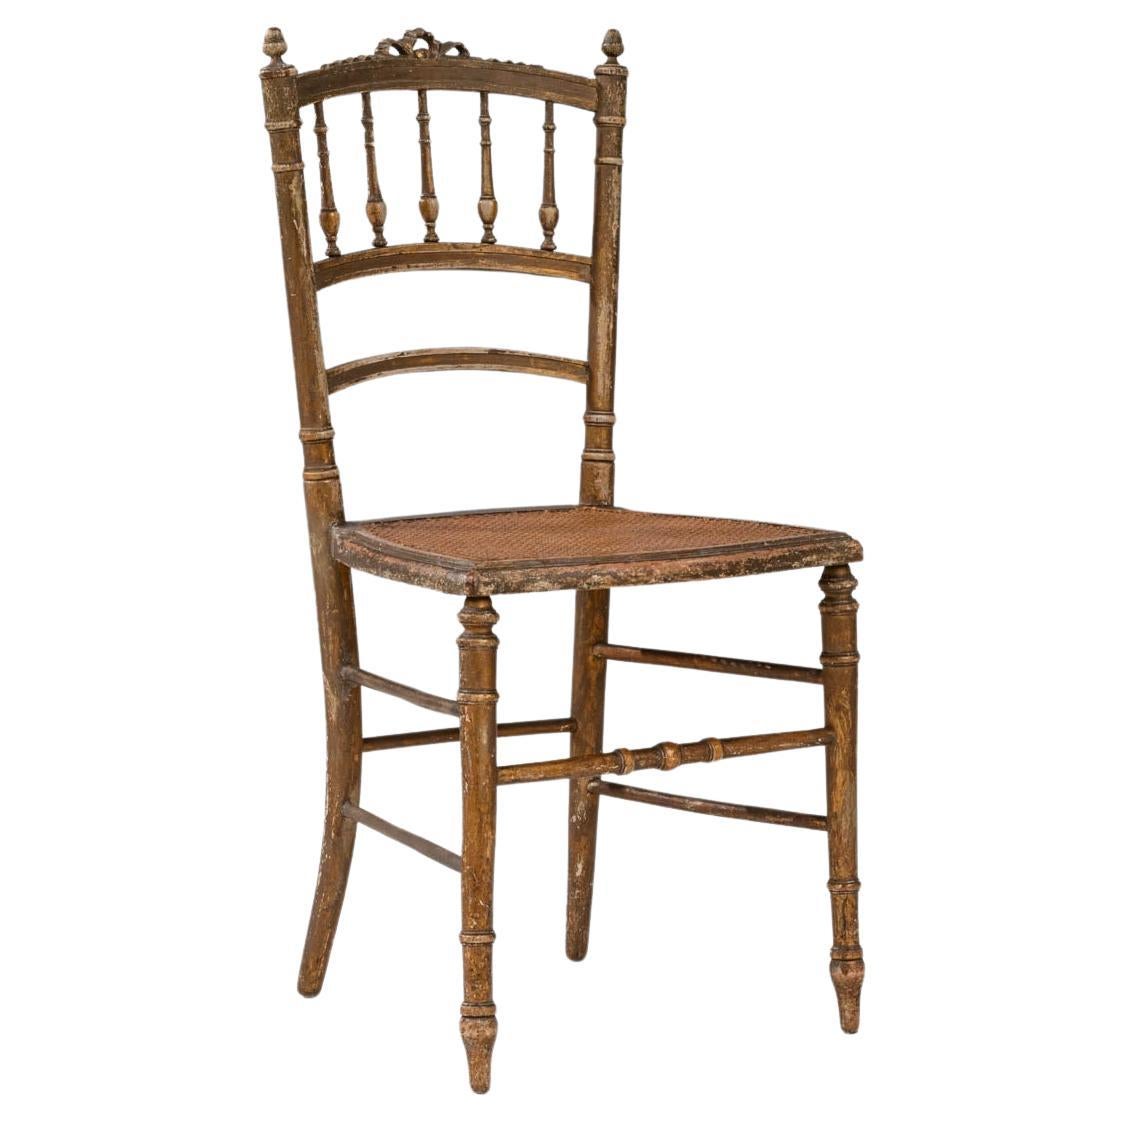 1880s French Wooden Chair For Sale